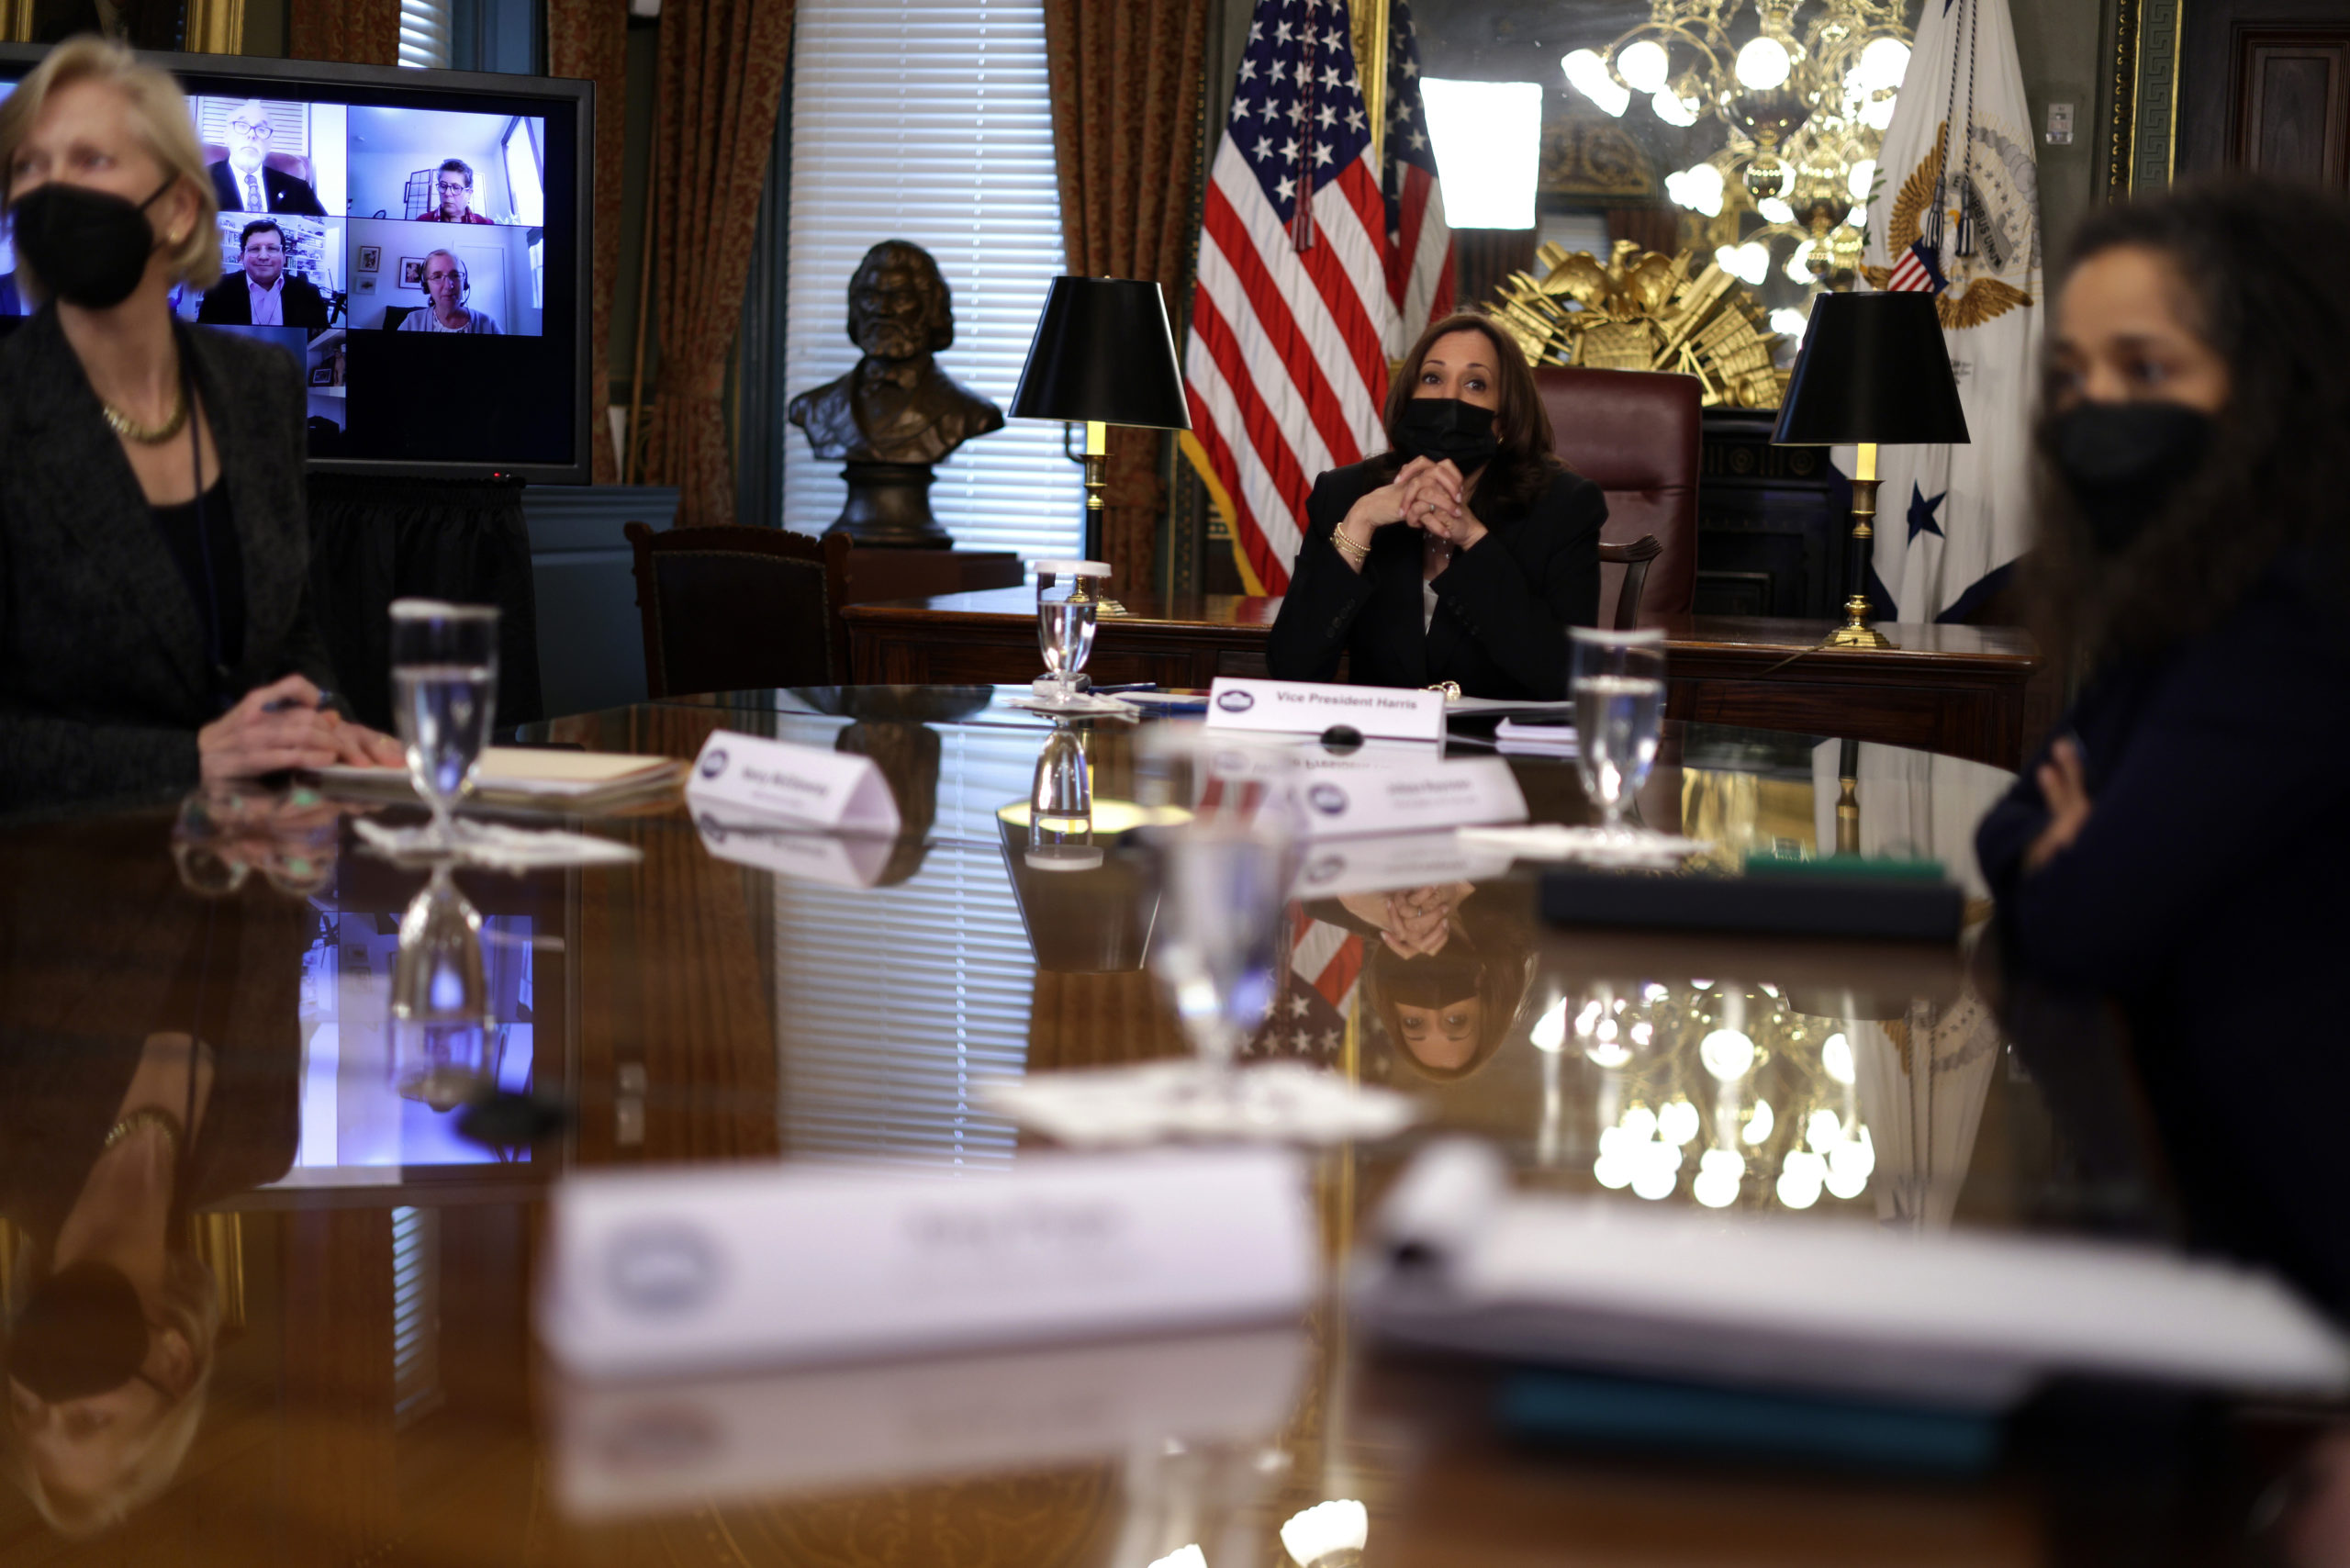 WASHINGTON, DC - APRIL 14: U.S. Vice President Kamala Harris participates in a virtual roundtable with experts on the southern border crisis at the Vice President’s Ceremonial Office at Eisenhower Executive Office Building of the White House on April 14, 2021 in Washington, DC. Vice President Harris convened the meeting to discuss assessments and recommendations for the immigration crisis in the region. (Photo by Alex Wong/Getty Images)